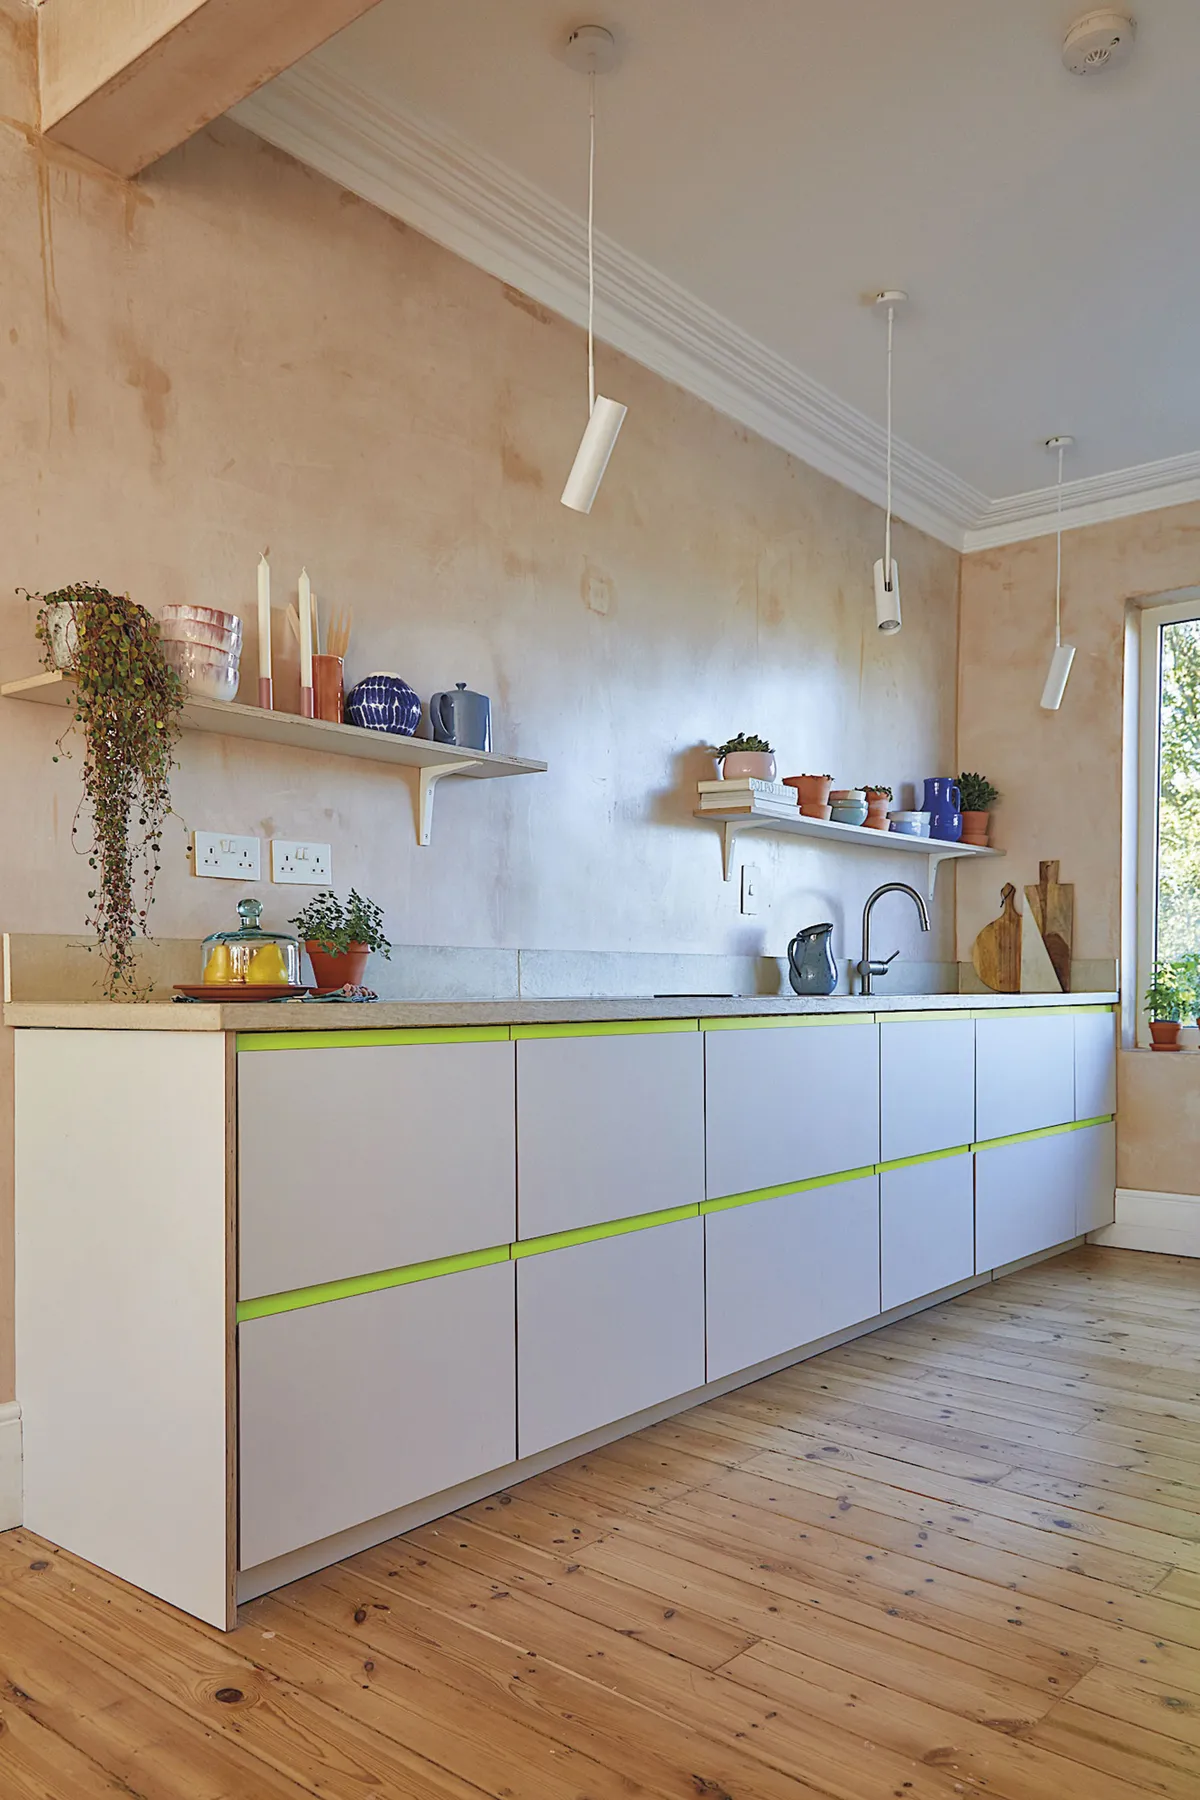 In the kitchen and throughout her home, Shrez has installed shelves which gives the illusion of more space